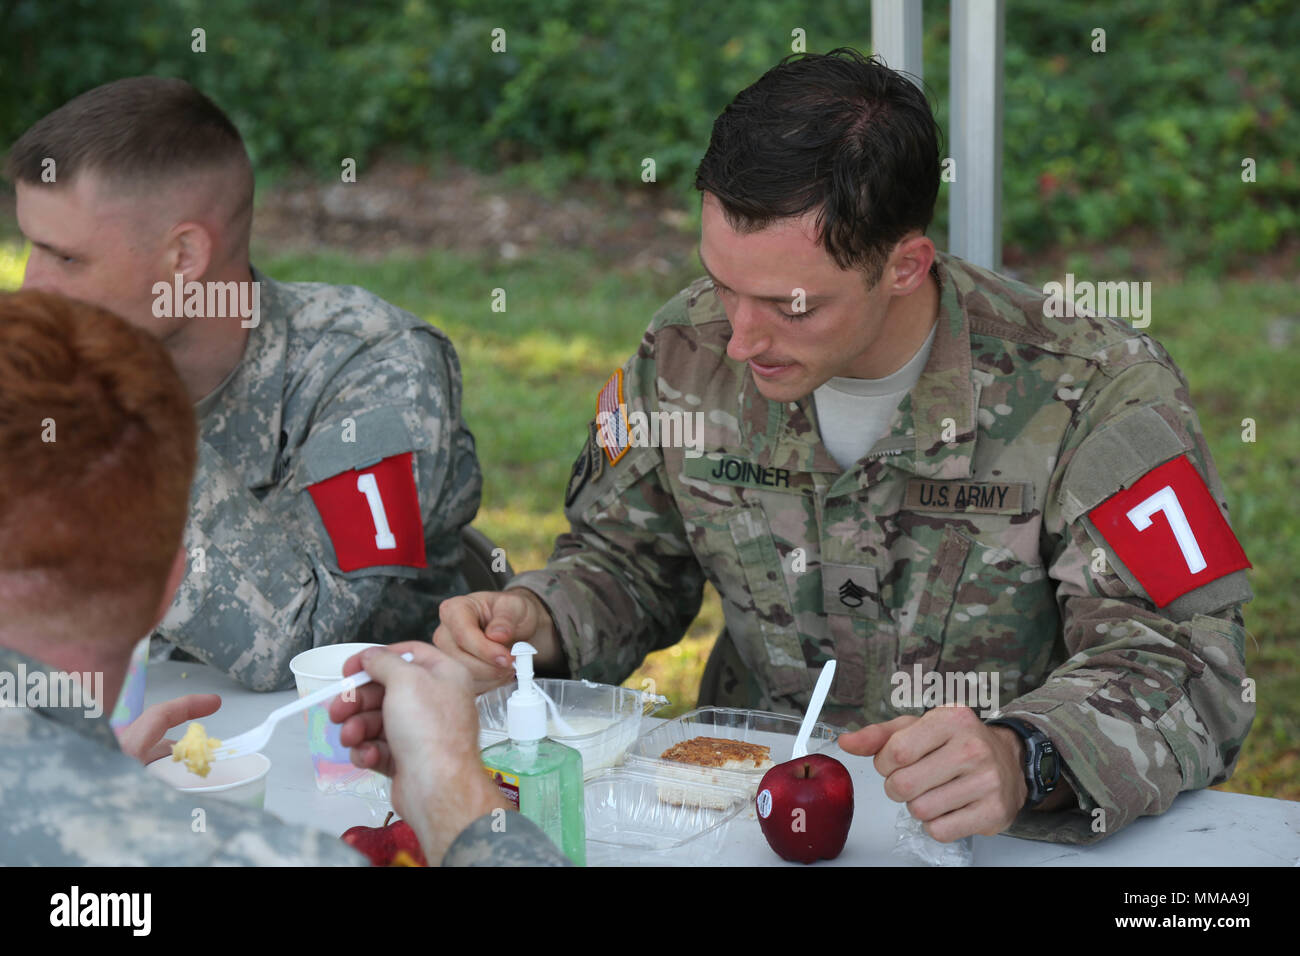 U.S. Army Staff Sgt. Eric Joiner, assigned to the Lyster Army Community Hospital, eats first hot meal after completing the 2017 Best Medic Competition at Fort Bragg, N.C., Sept. 20, 2017. The competition tested the physical and mental toughness, as well as the technical competence, of each medic to identify the team moving forward to represent the region at the next level of the competition.  (U.S. Army photo by Pfc. Meleesa Gutierrez) Stock Photo